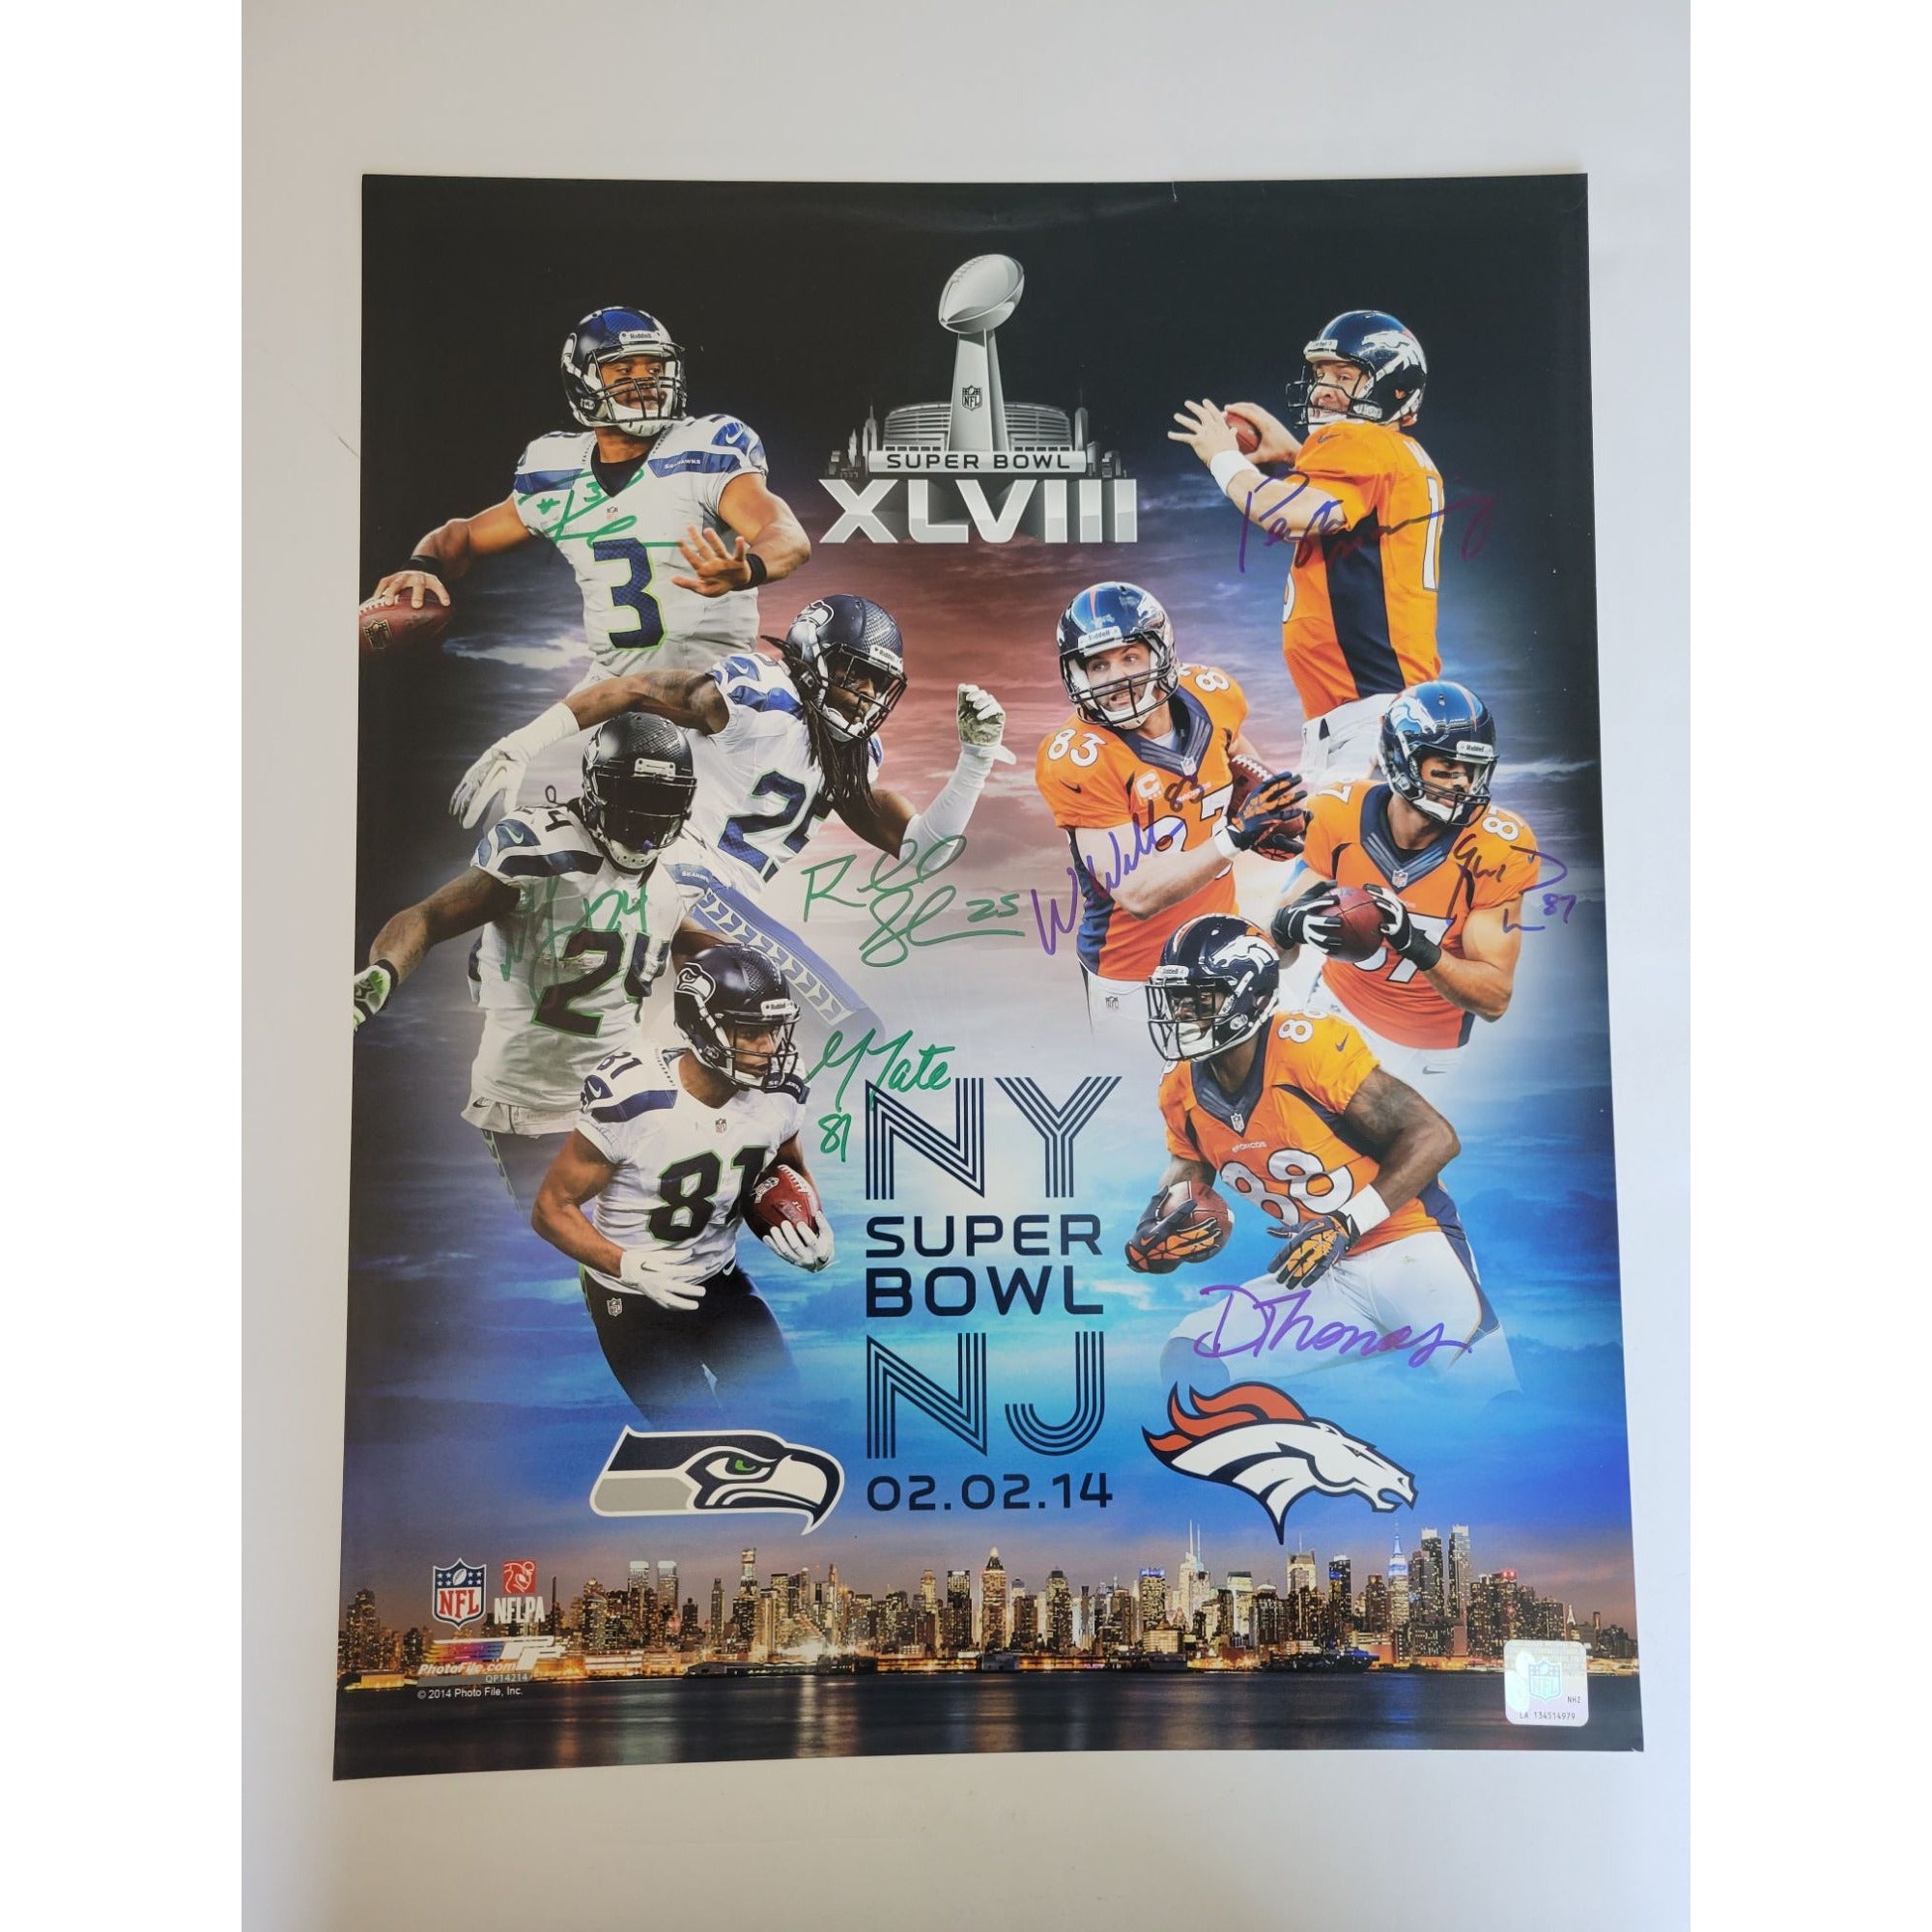 Russell Wilson Peyton Manning Marshawn Lynch Demaryius Thomas 16 by 20 photo signed with proof